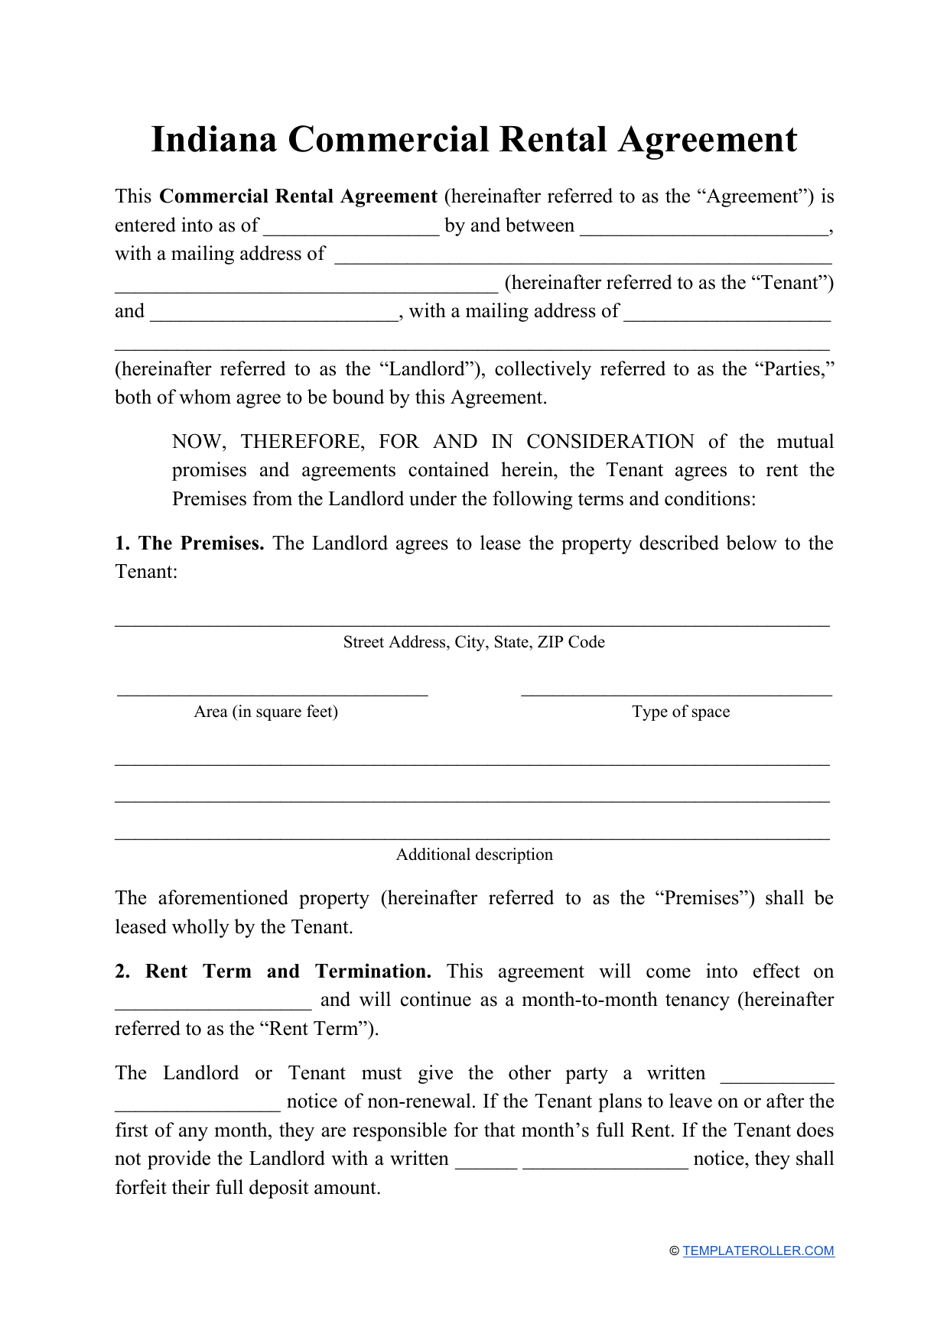 Commercial Rental Agreement Template - Indiana, Page 1